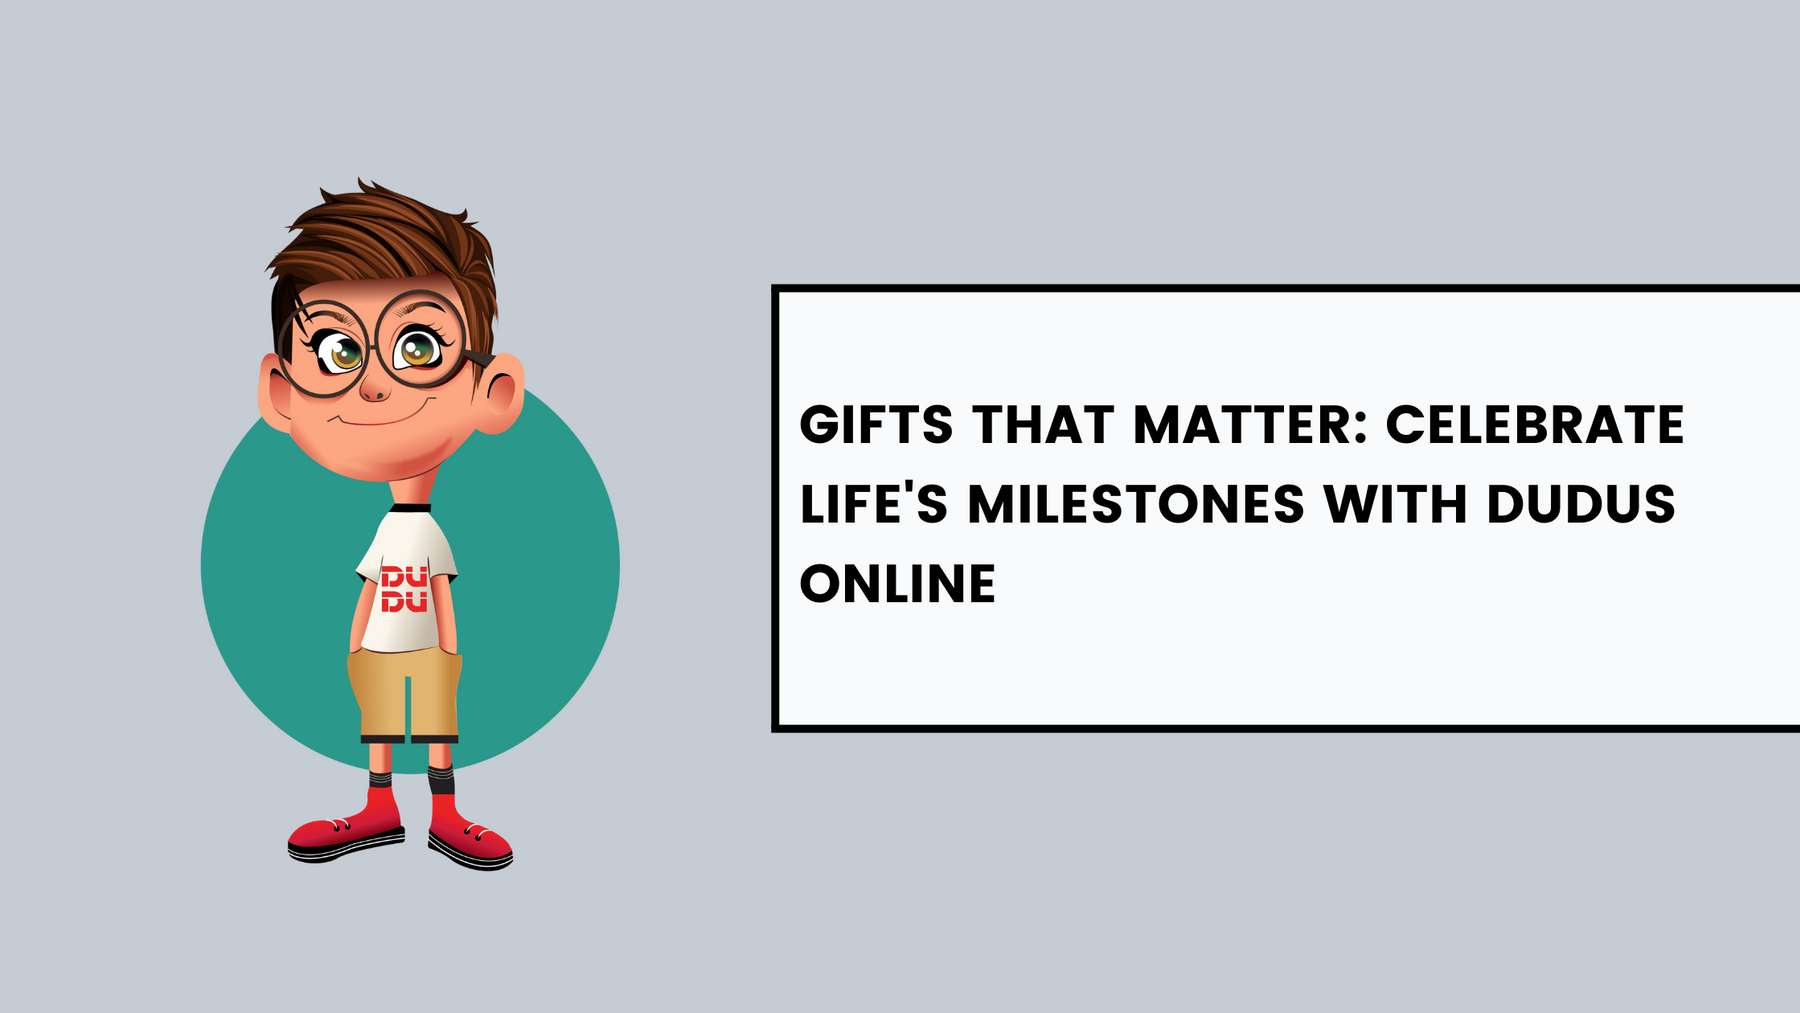 Gifts That Matter: Celebrate Life's Milestones With Dudus Online